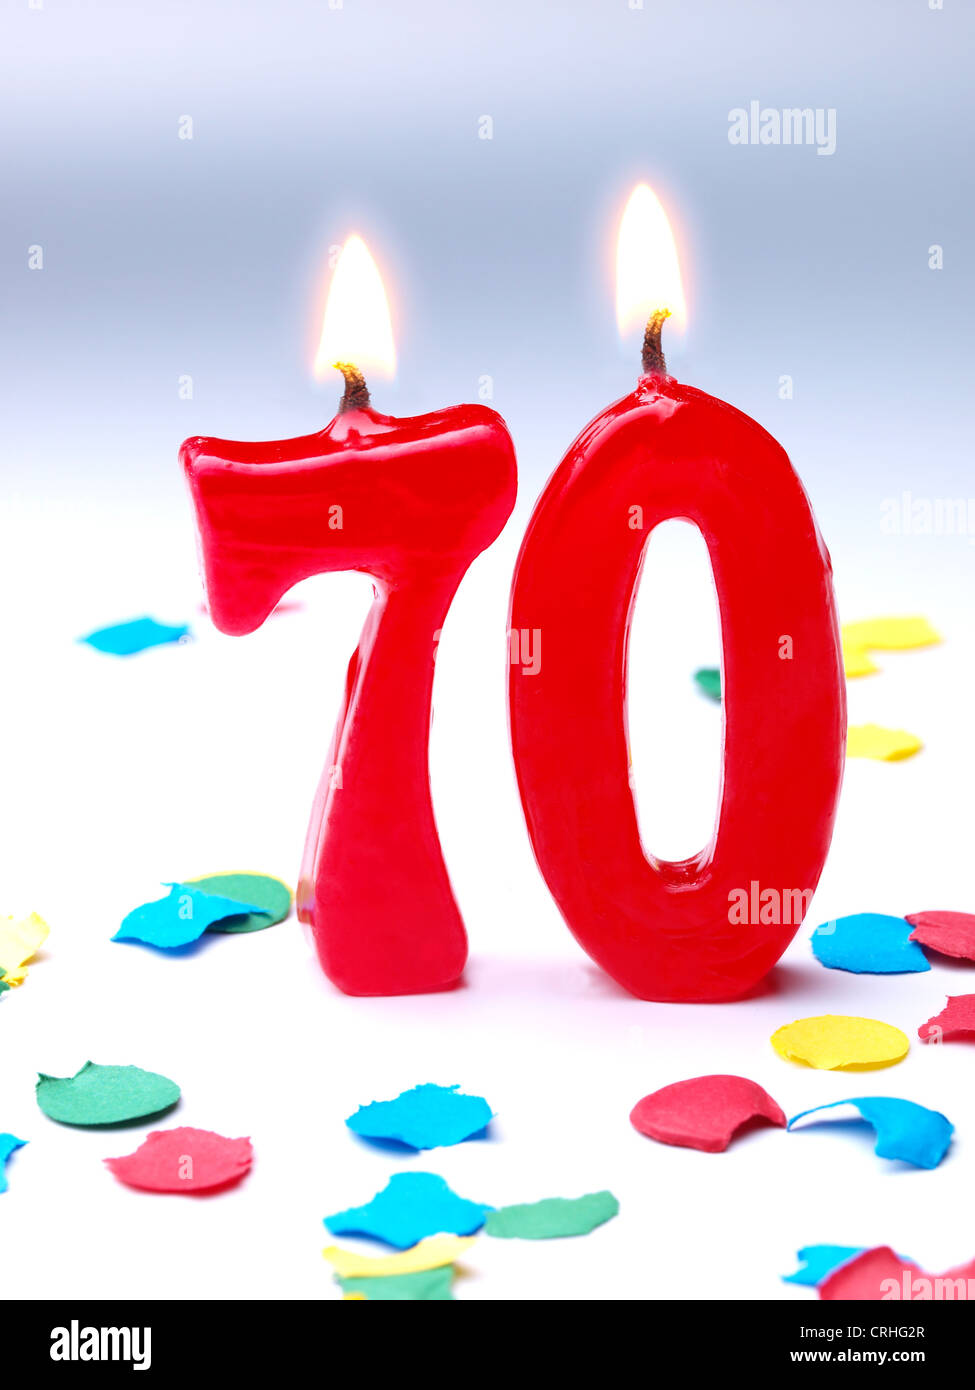 Birthday-anniversary candles showing Nr. 70 Stock Photo